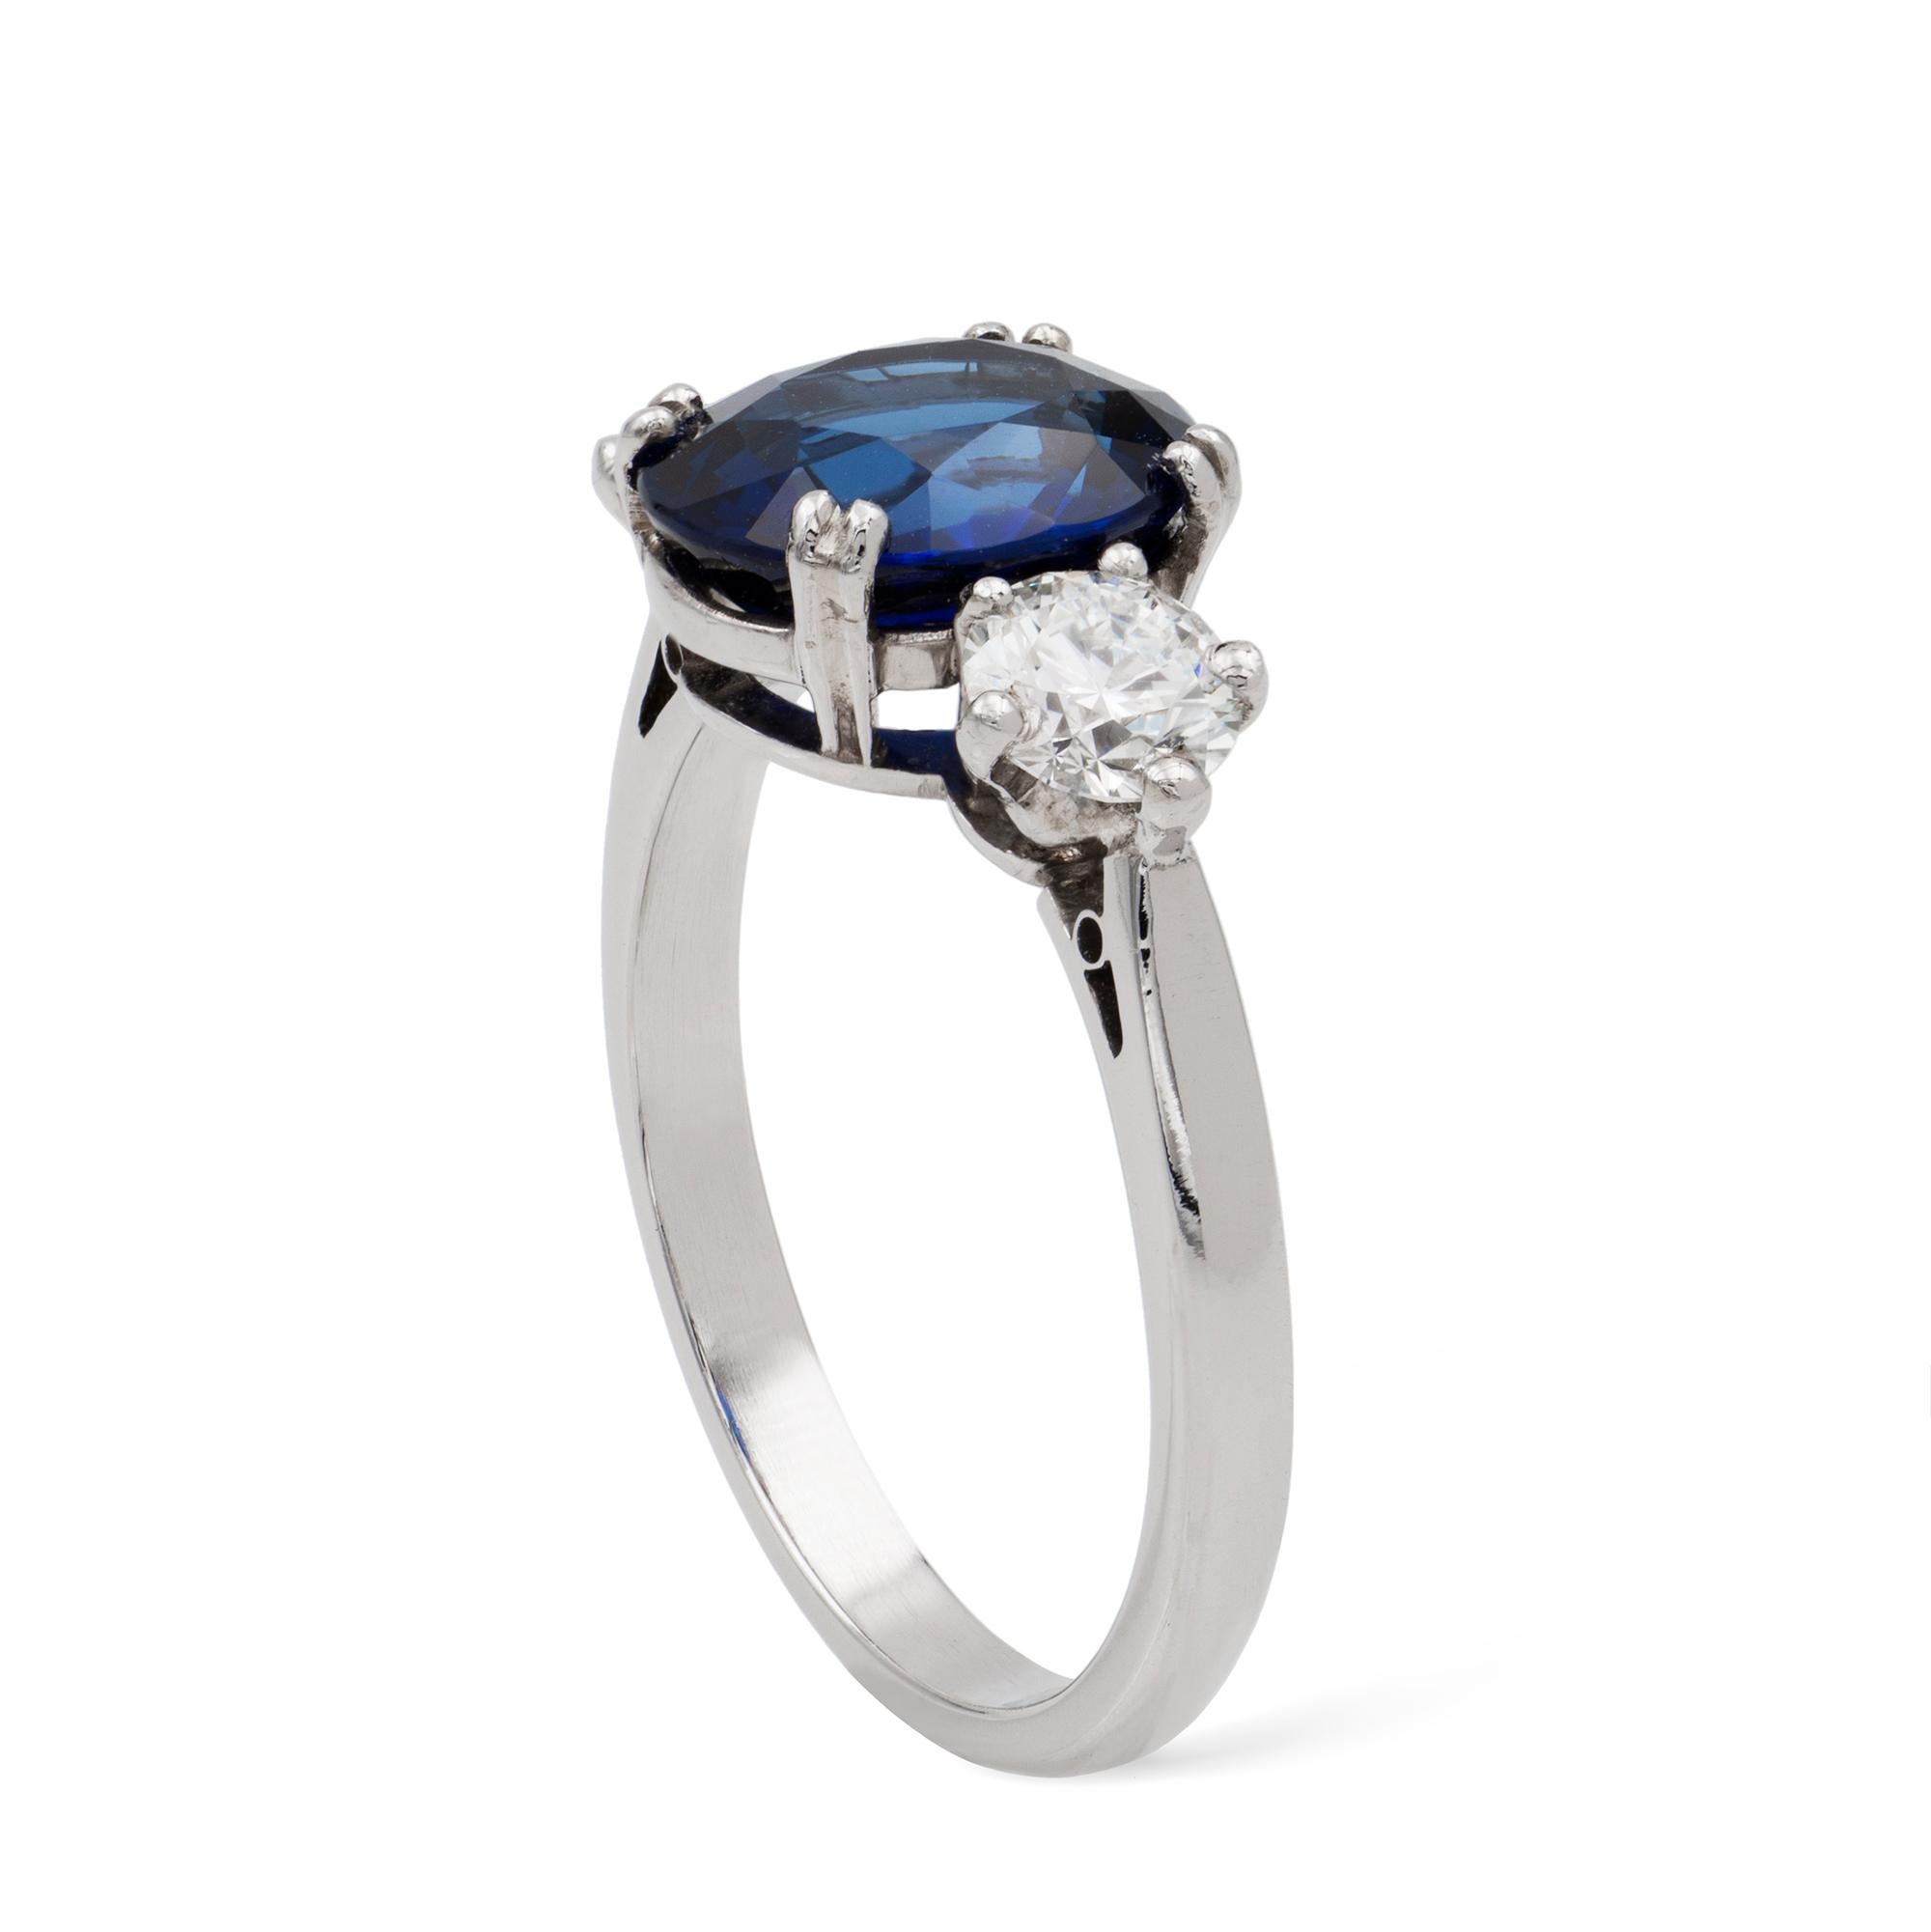 A sapphire and diamond three-stone ring, the oval-shaped sapphire, weighing 3.12 carats, set between two round brilliant-cut diamonds weighing 0.66 carats in total, all claw-set in platinum mount, hallmarked 950 platinum London 1991,  the head